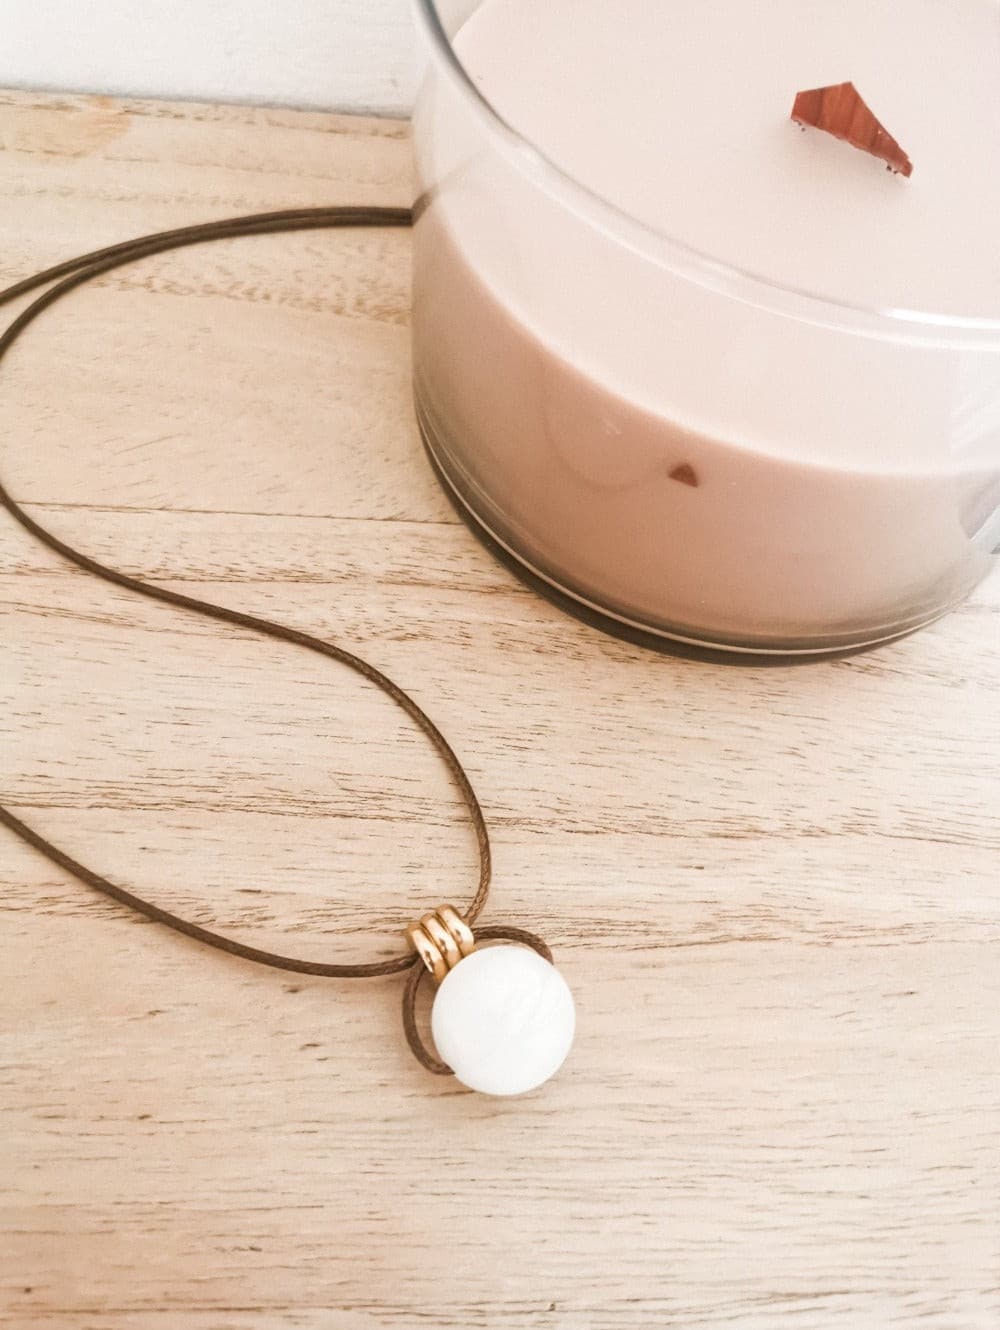 The Antique Pearl Breastfeeding & teething Necklace with gold detail is perfect for fiddling, chewing or playing with whilst nursing or teething, worn by mum.